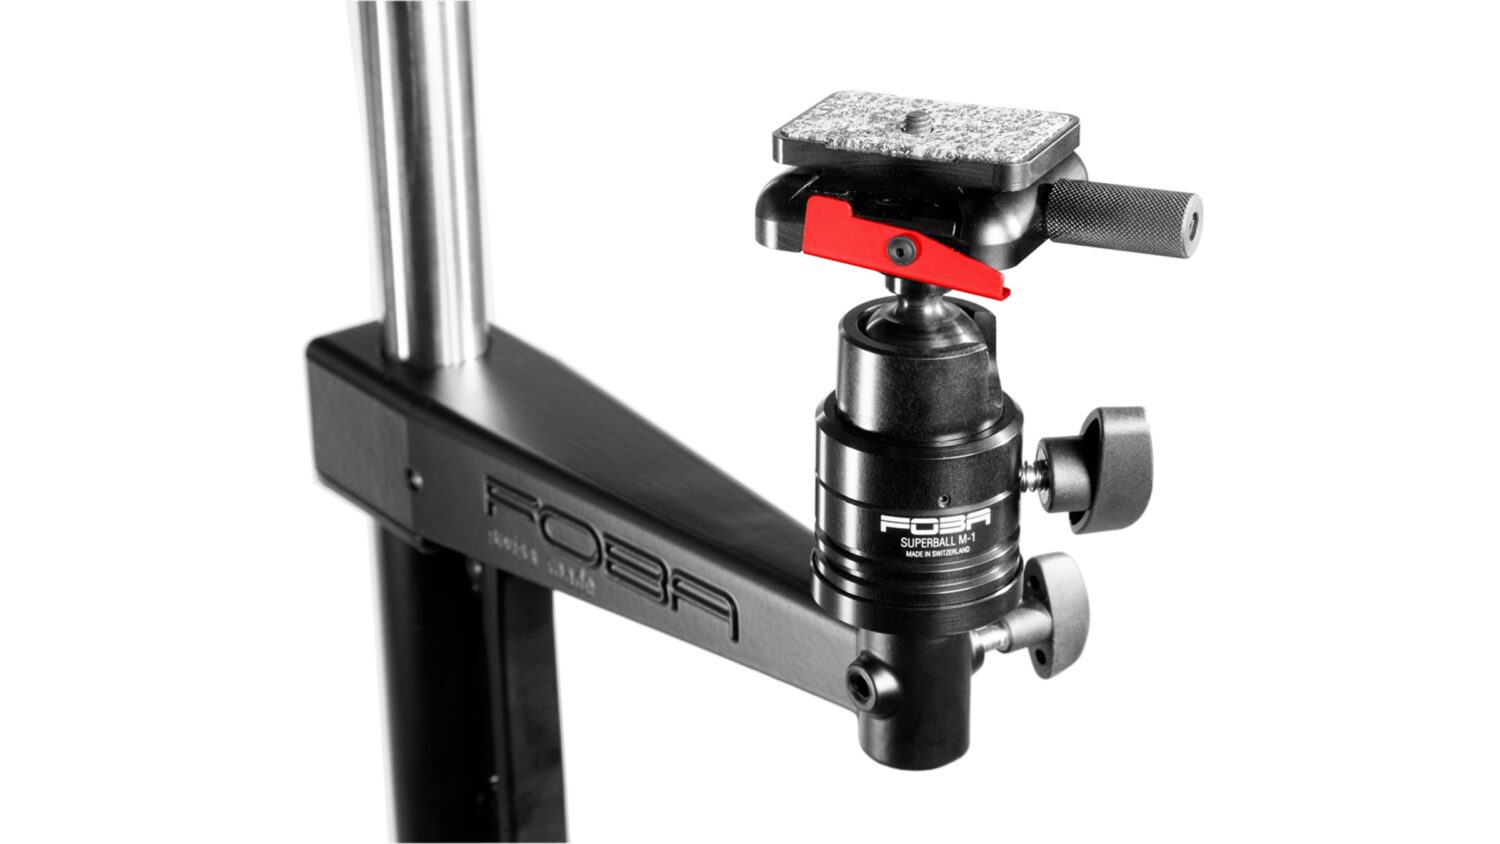 FOBA SUPERBALL with quick-release unit on sliding clamp with trigger